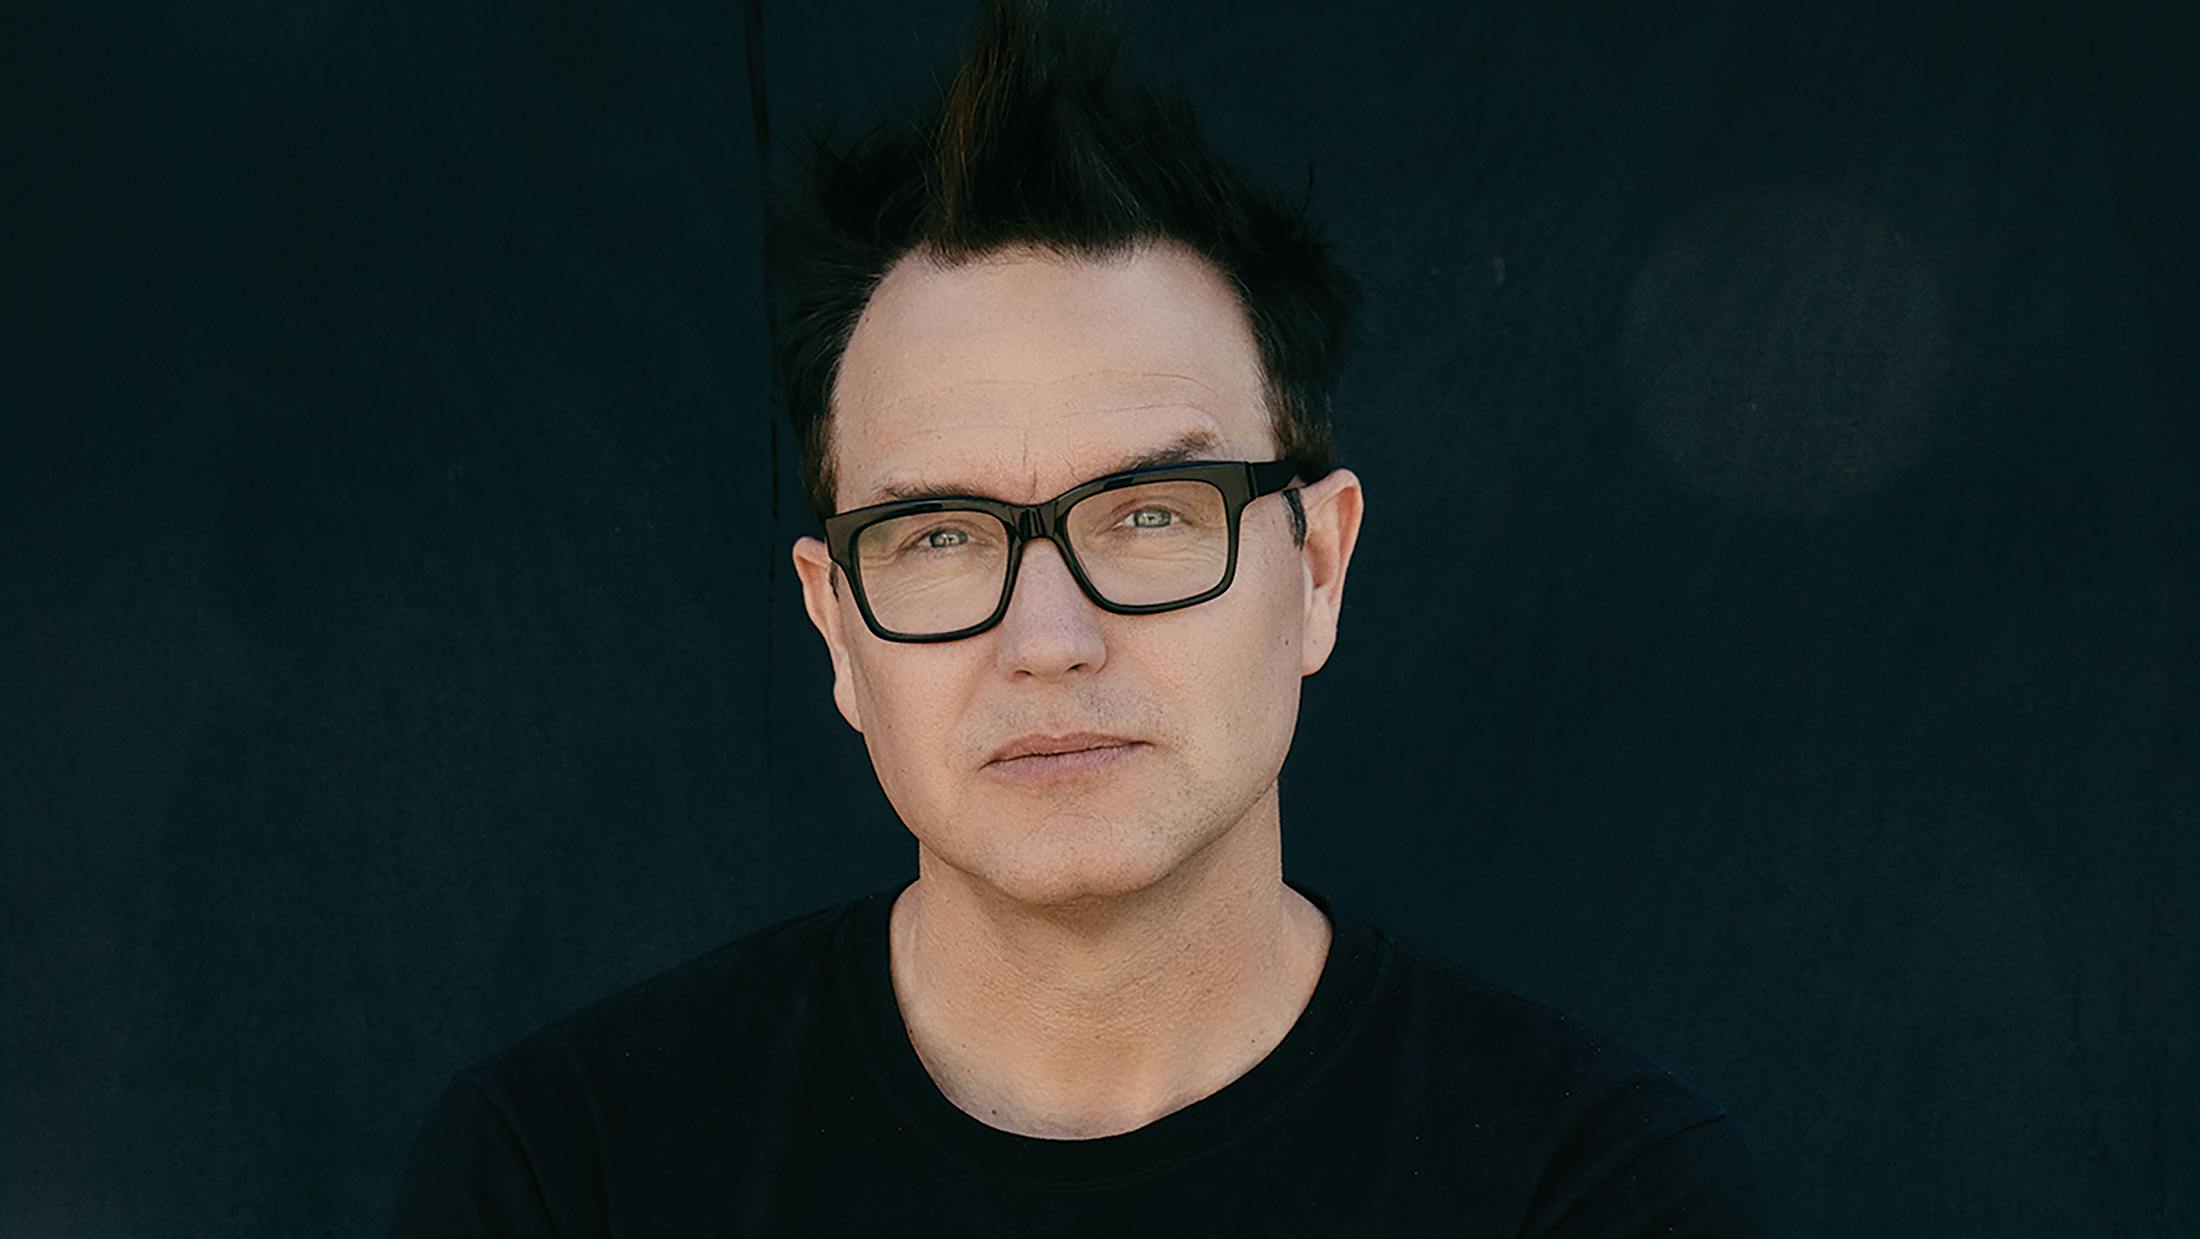 Mark Hoppus gives update on cancer battle: "Scans indicate that the chemo is working!"